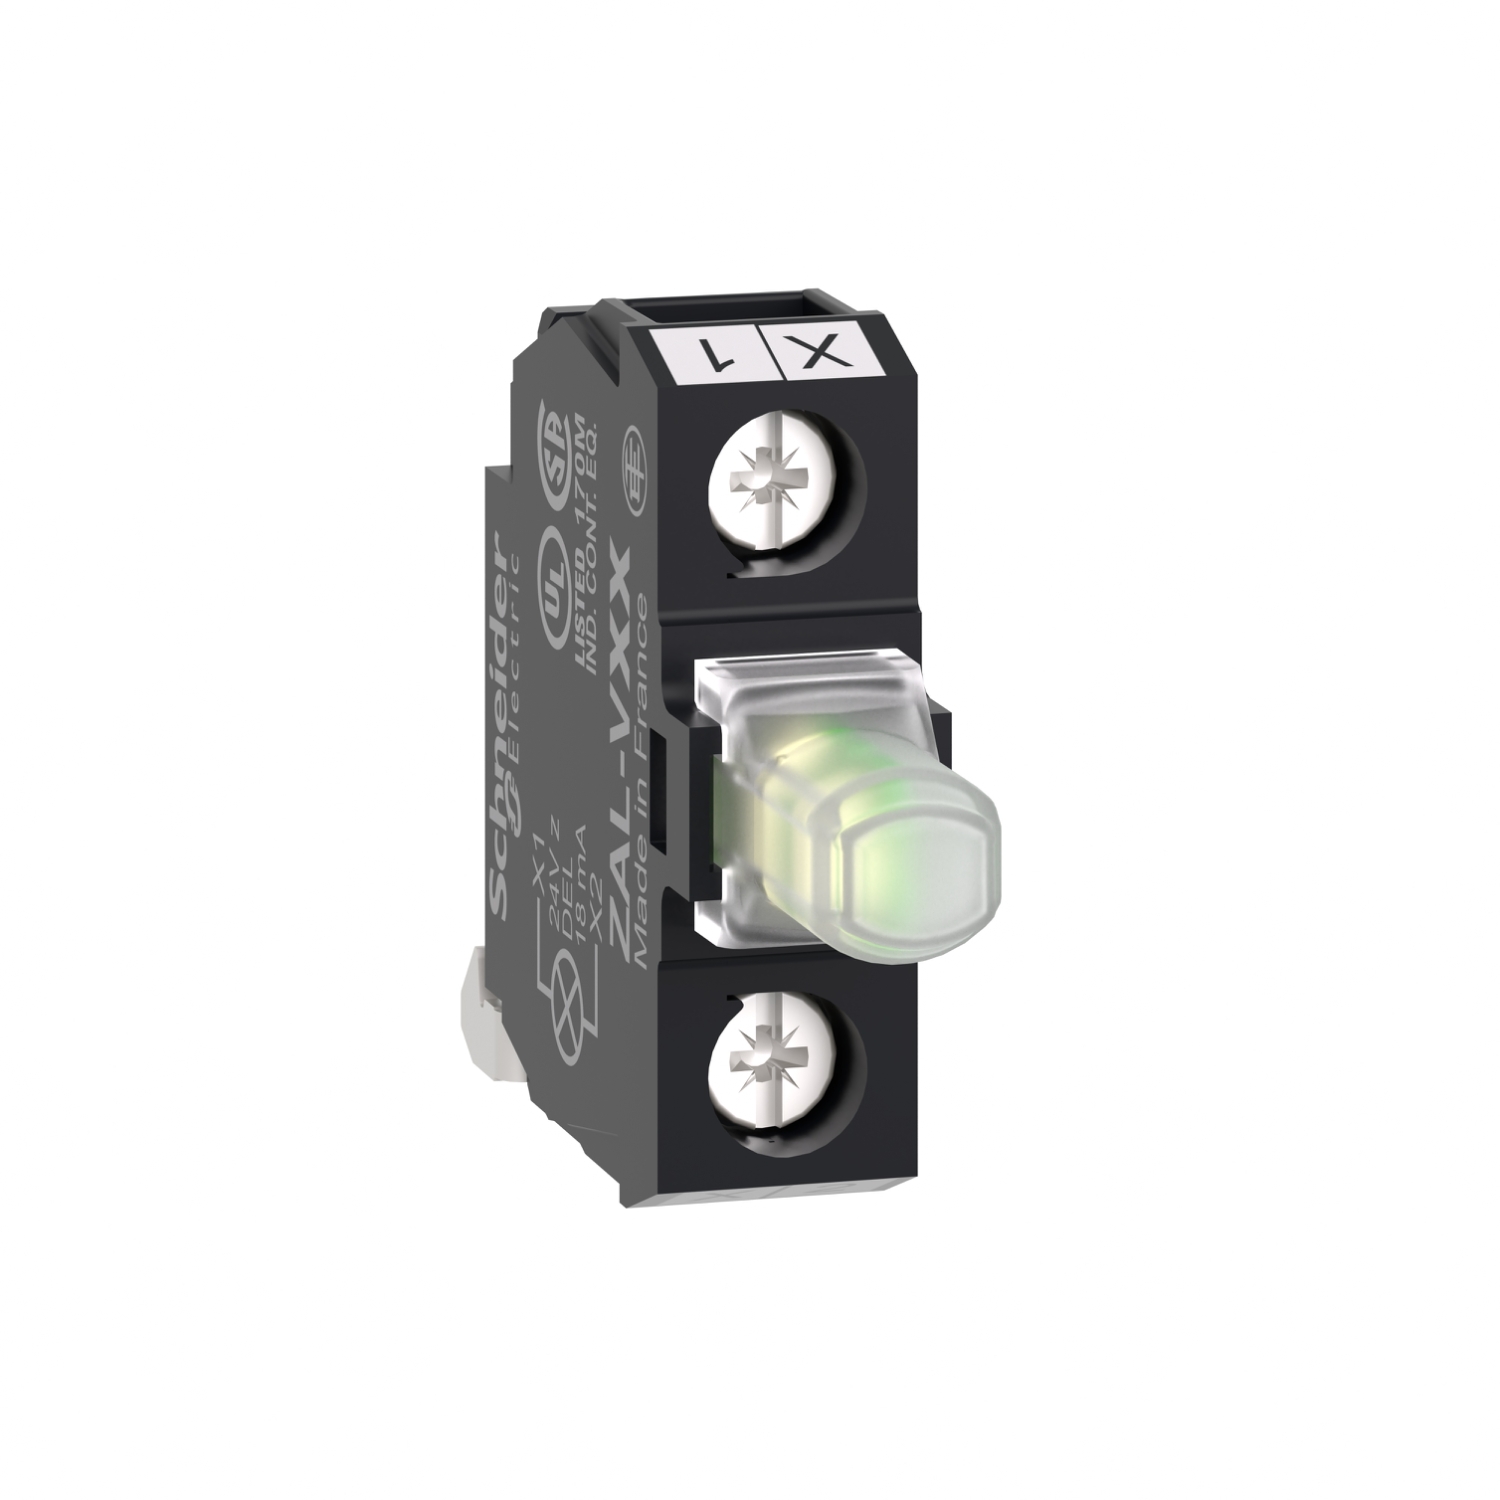 Light block, Harmony XALD, XALK, for head 22mm, universal LED, mounting in back of enclosure, 24V AC DC